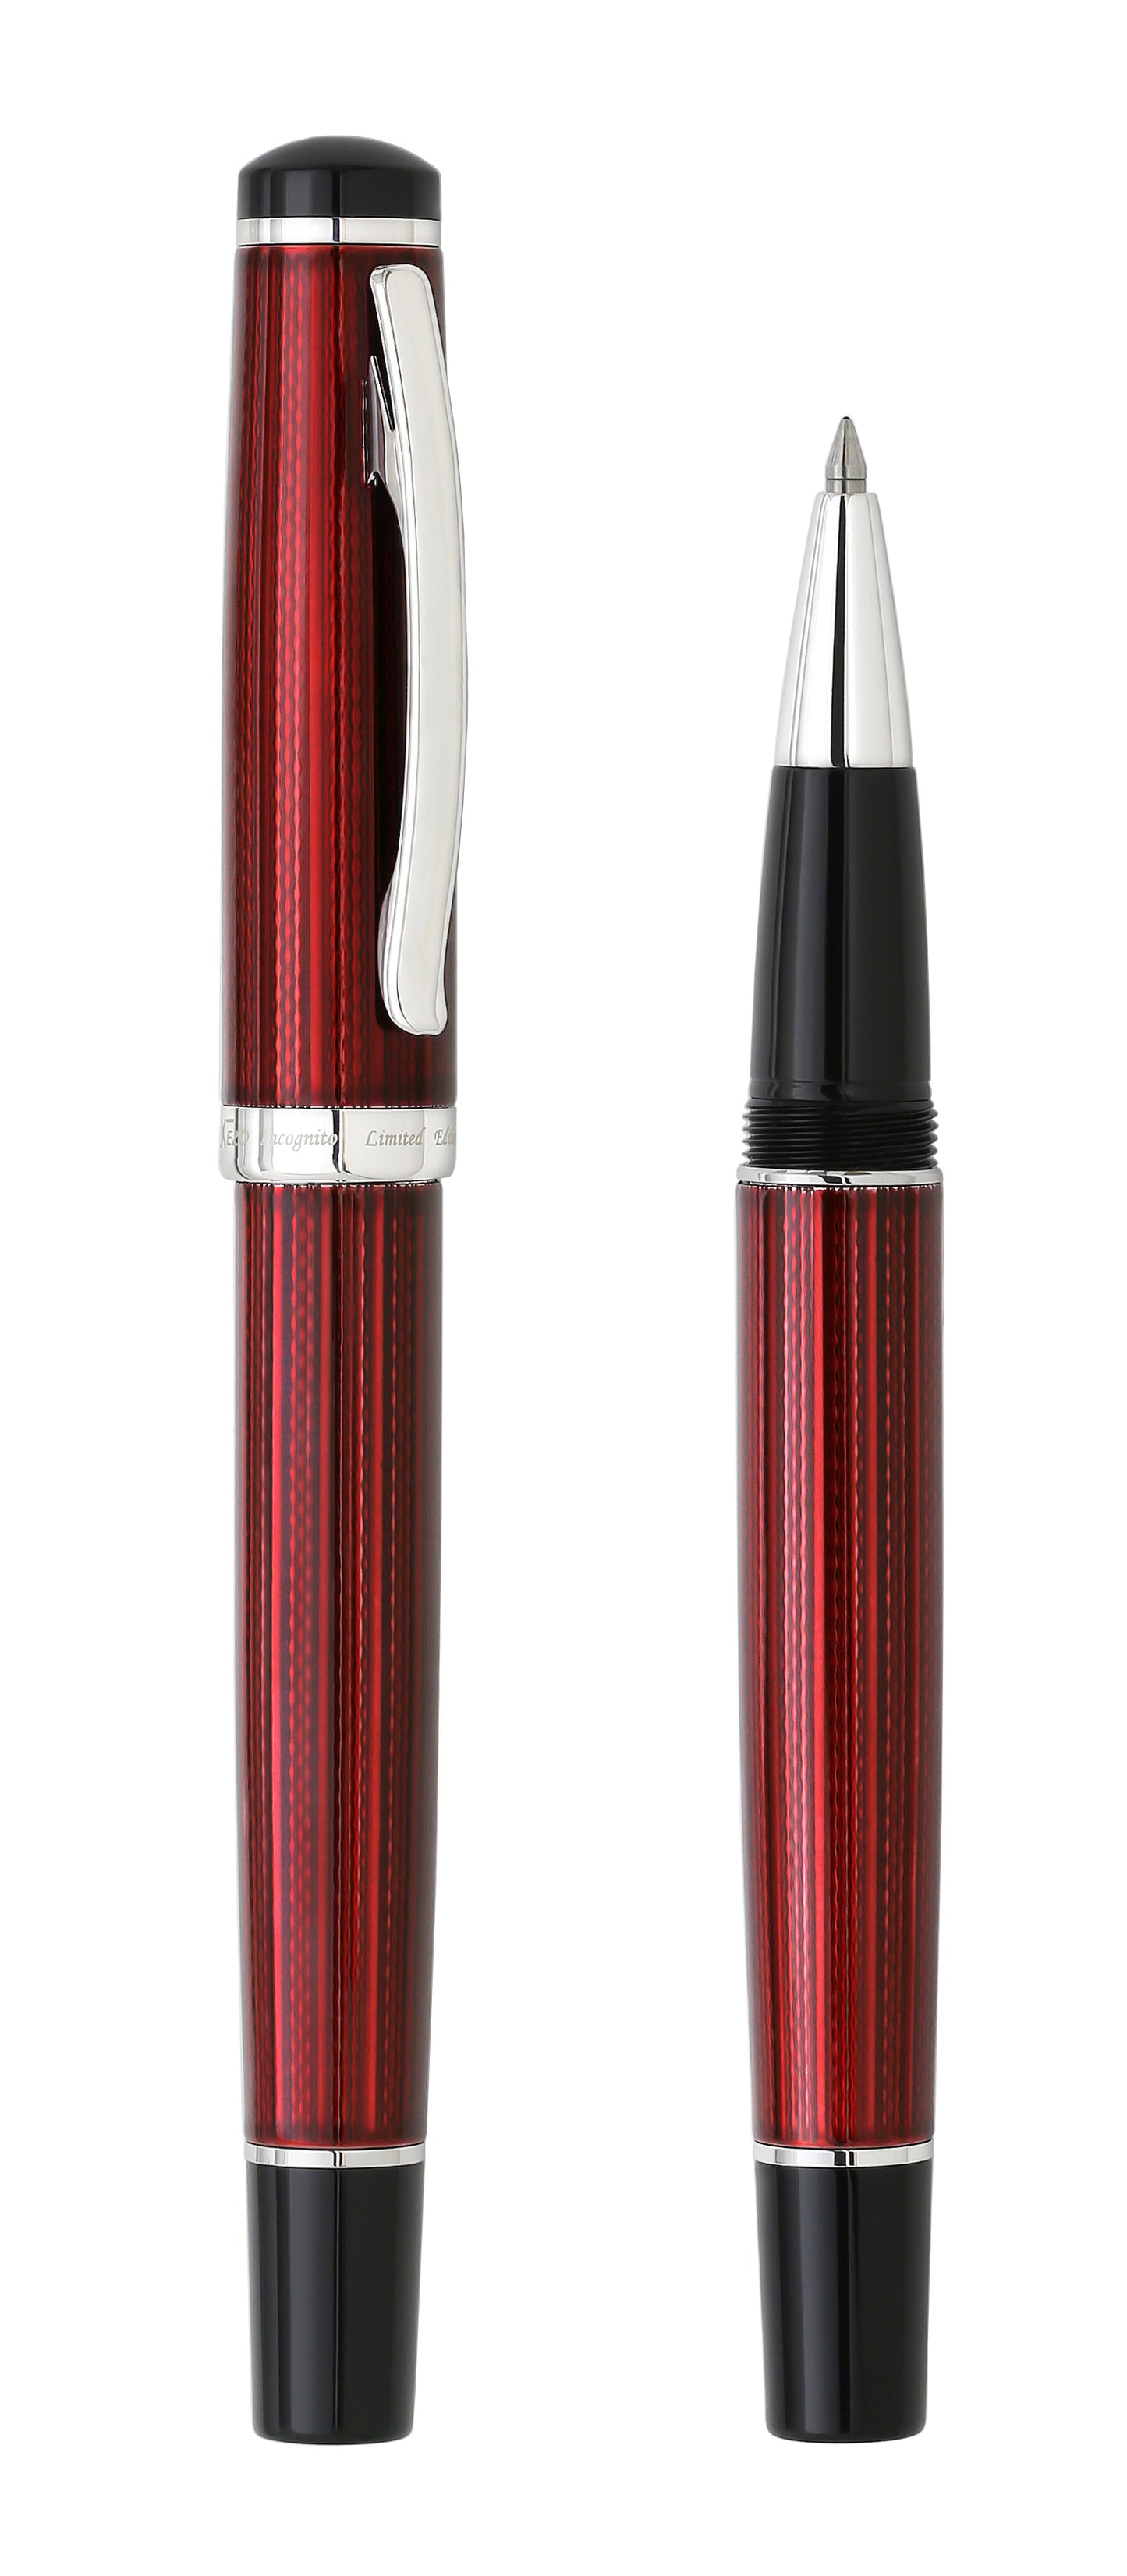 Xezo - Comparison between the capped and uncapped Incognito Burgundy R-1 rollerball pens